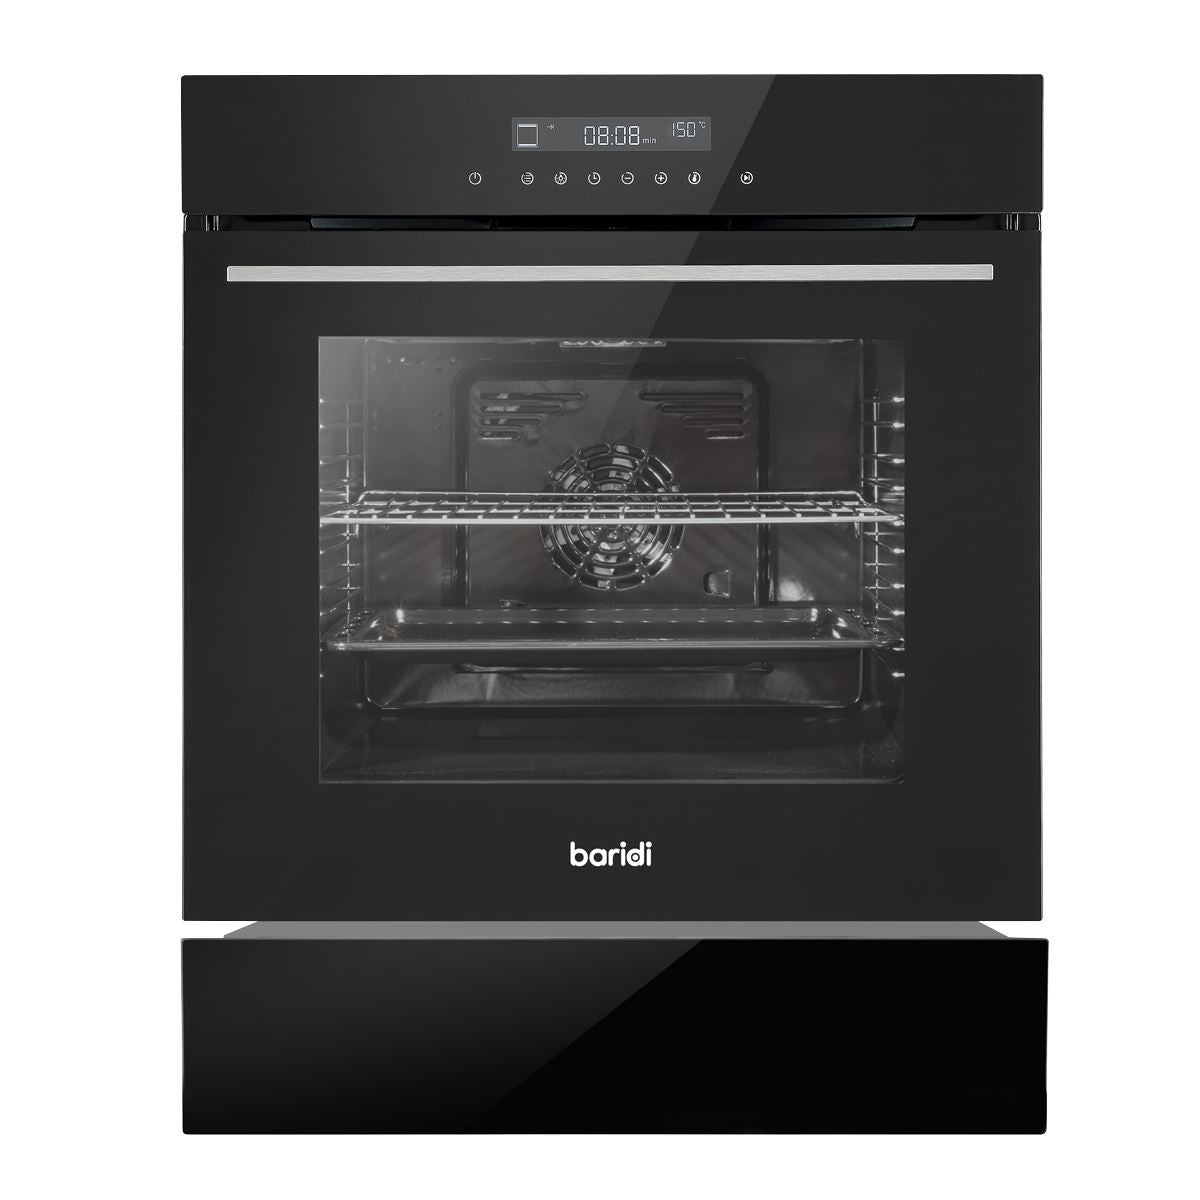 Baridi 60cm 10-Function Fan-Assisted Oven with Touchscreen Controls & 60cm Warming Drawer Bundle, Black